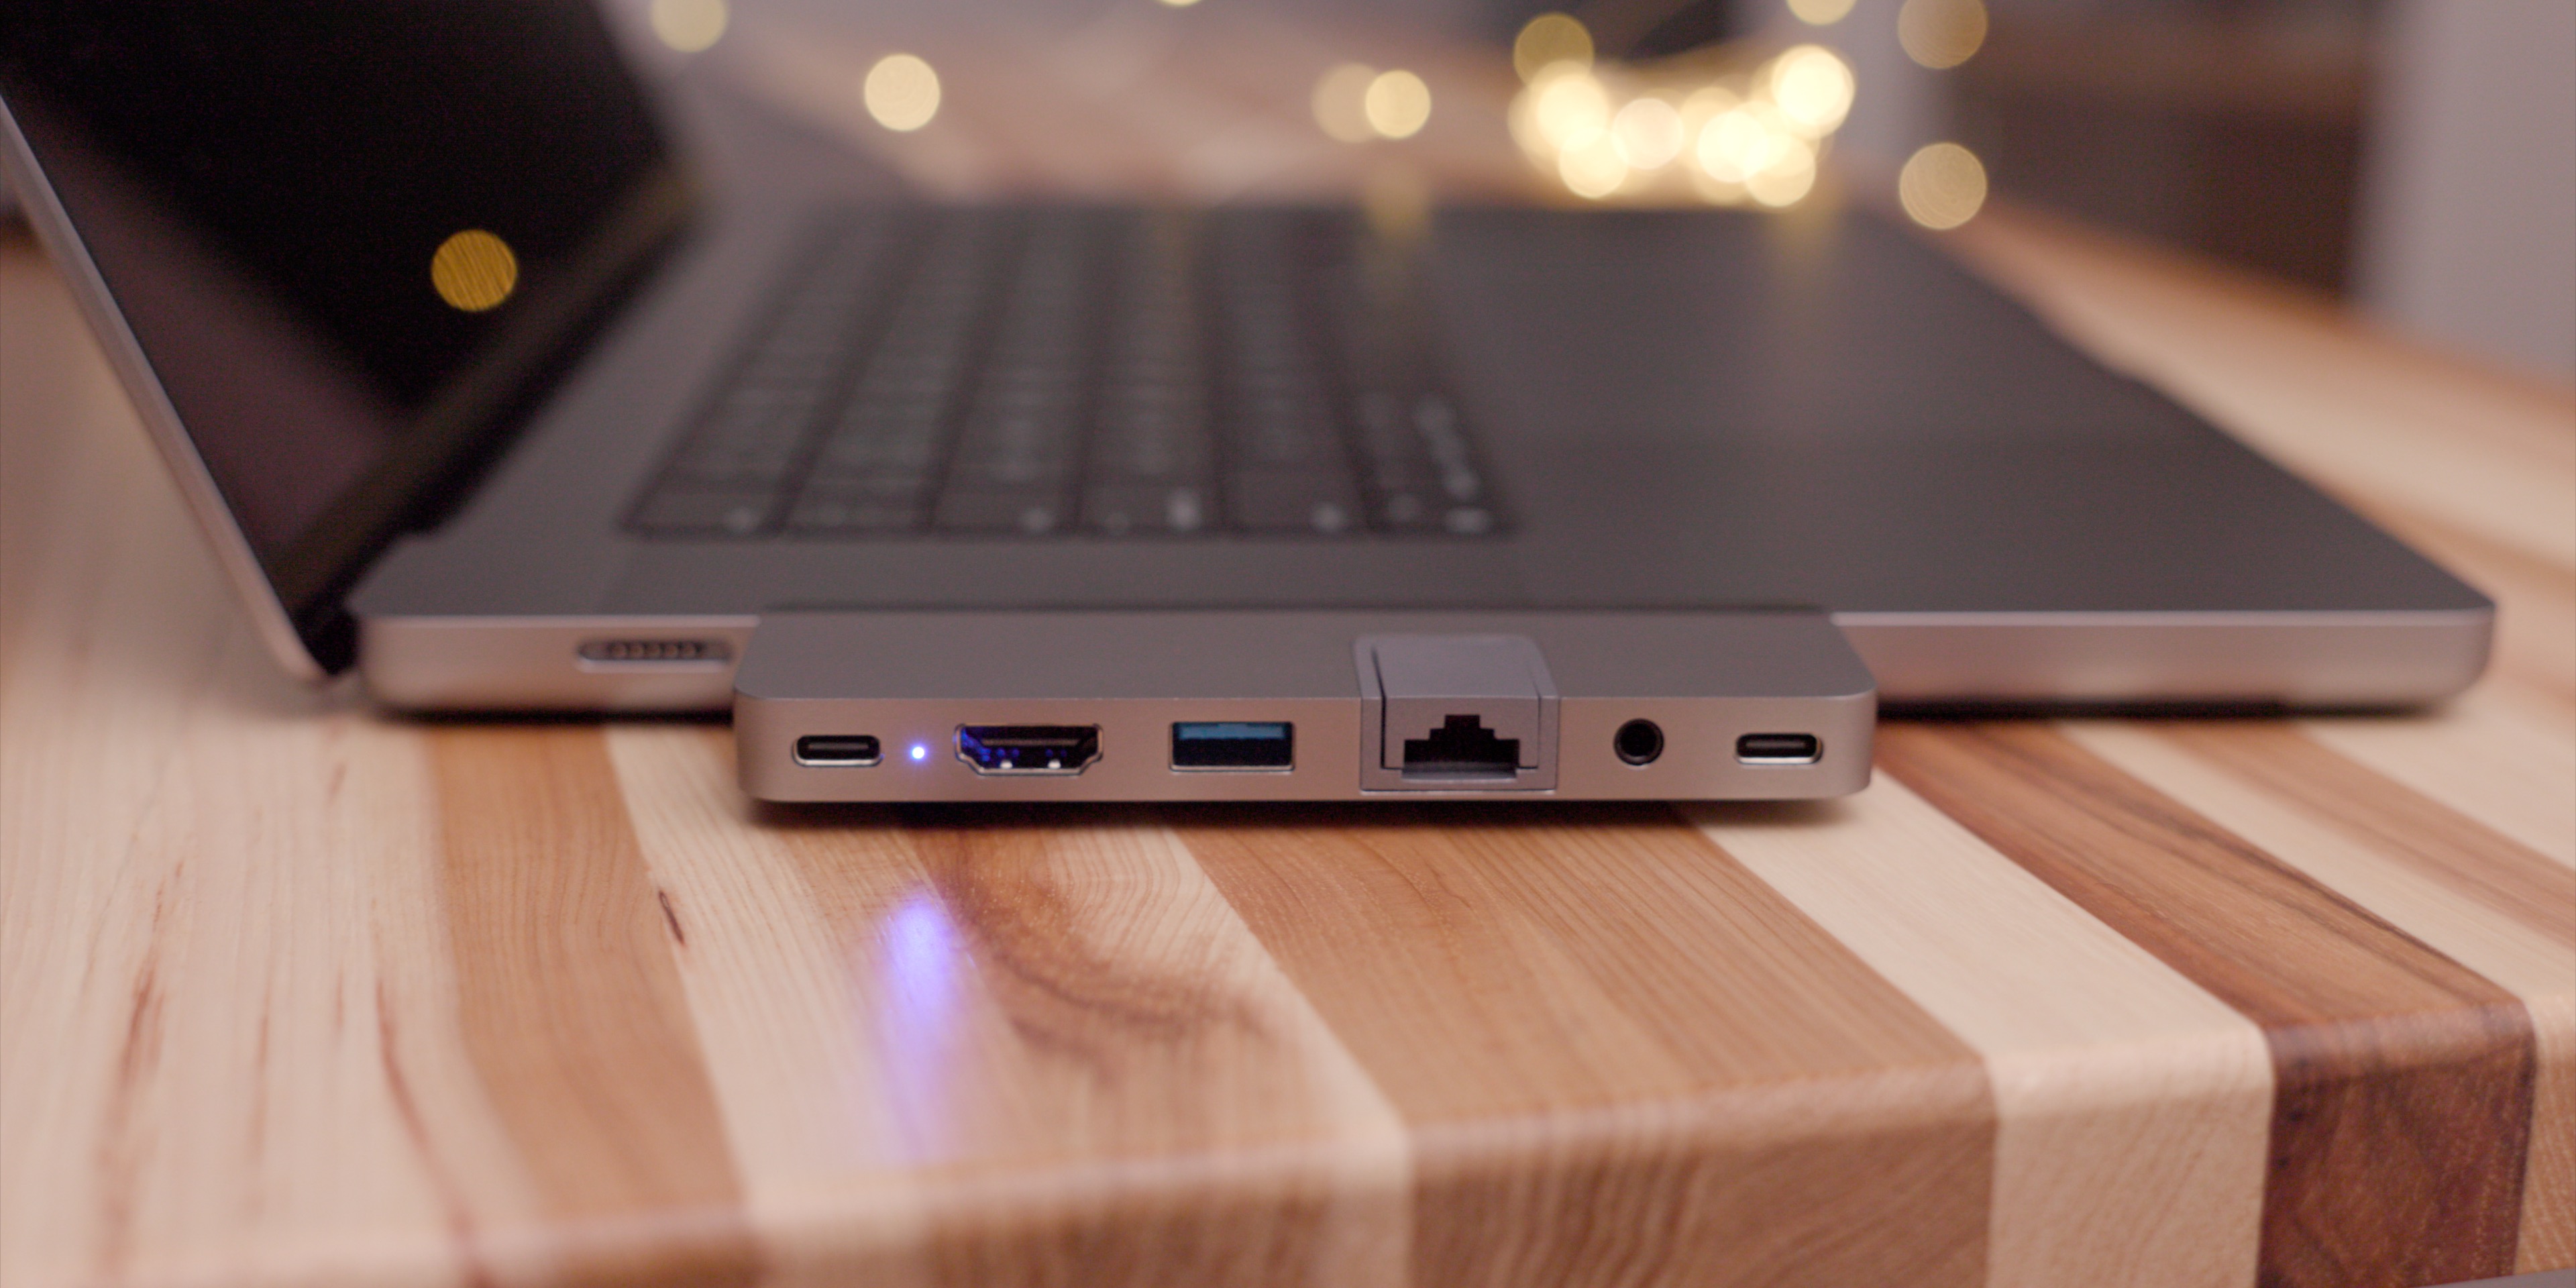 George Eliot Helligdom Secréte Hands-on: HyperDrive Duo Pro USB-C hub for the 2016-2021 MacBook Pro  [Video] - 9to5Mac